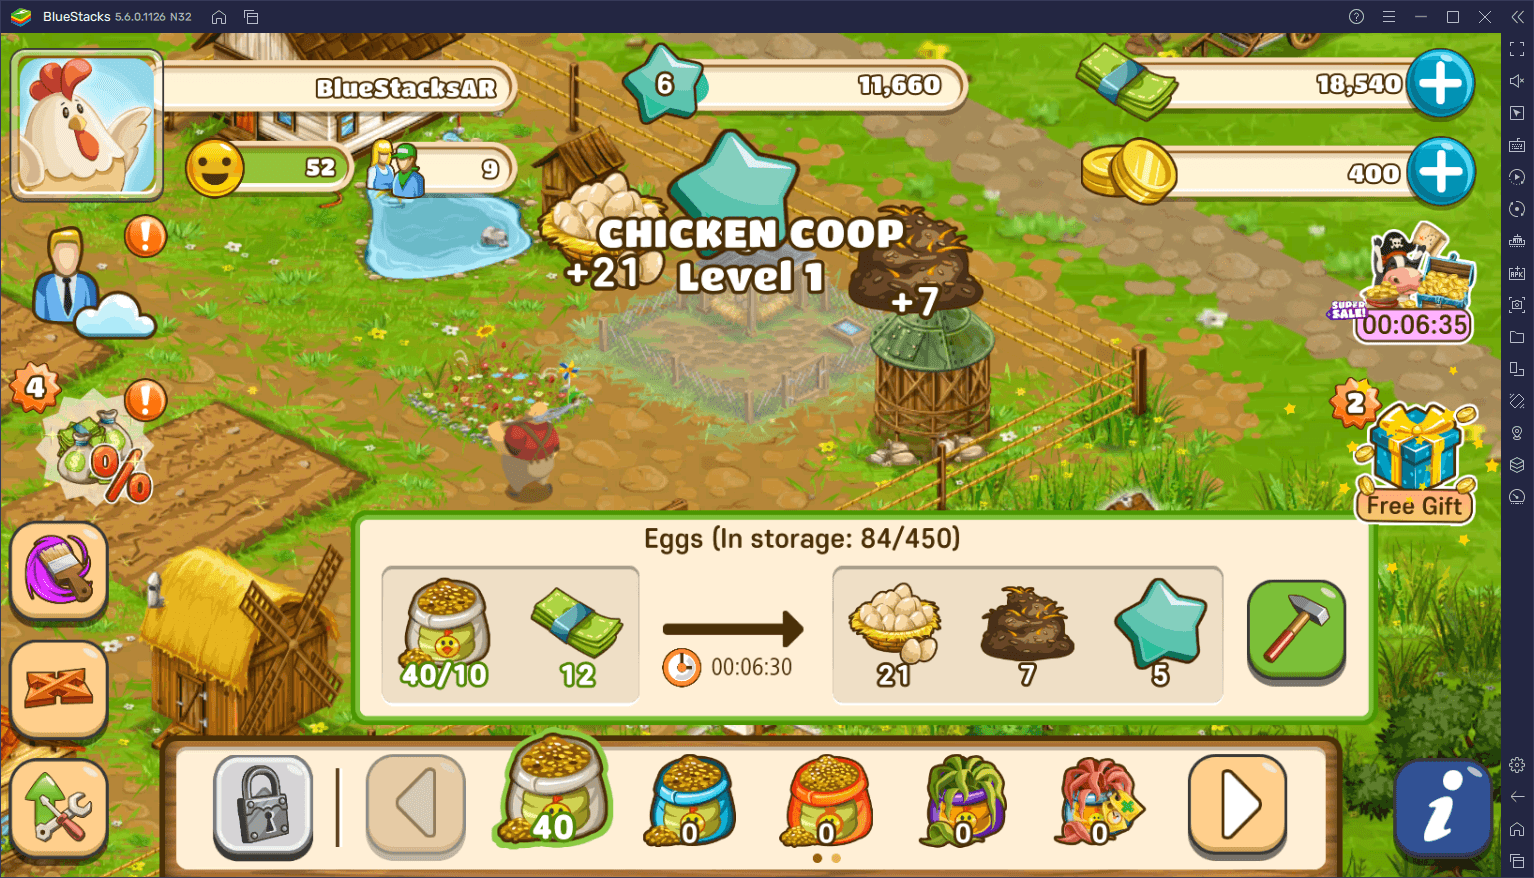 The Best Big Farm: Mobile Harvest Tips, Tricks, And Cheats to Develop Your Farmstead